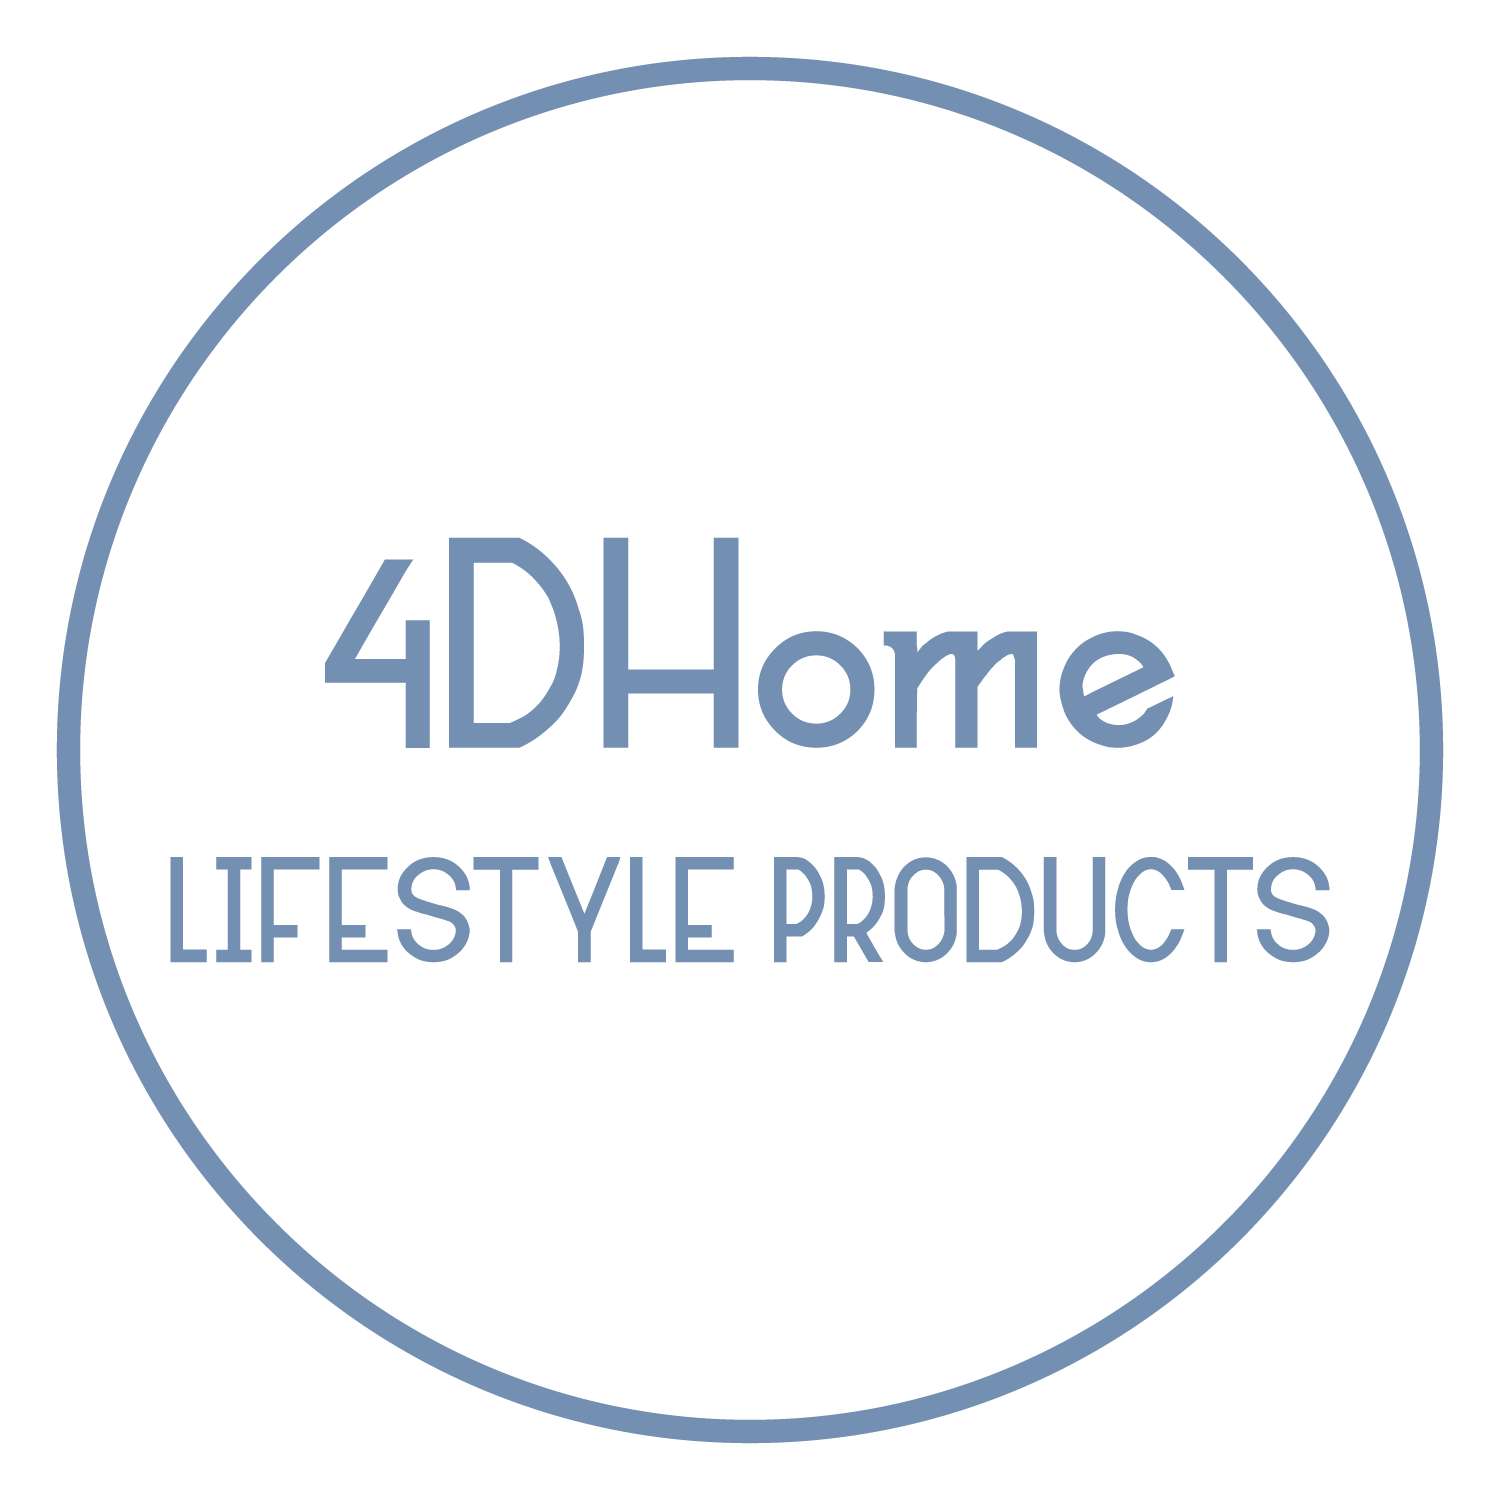 4DHome Lifestyle